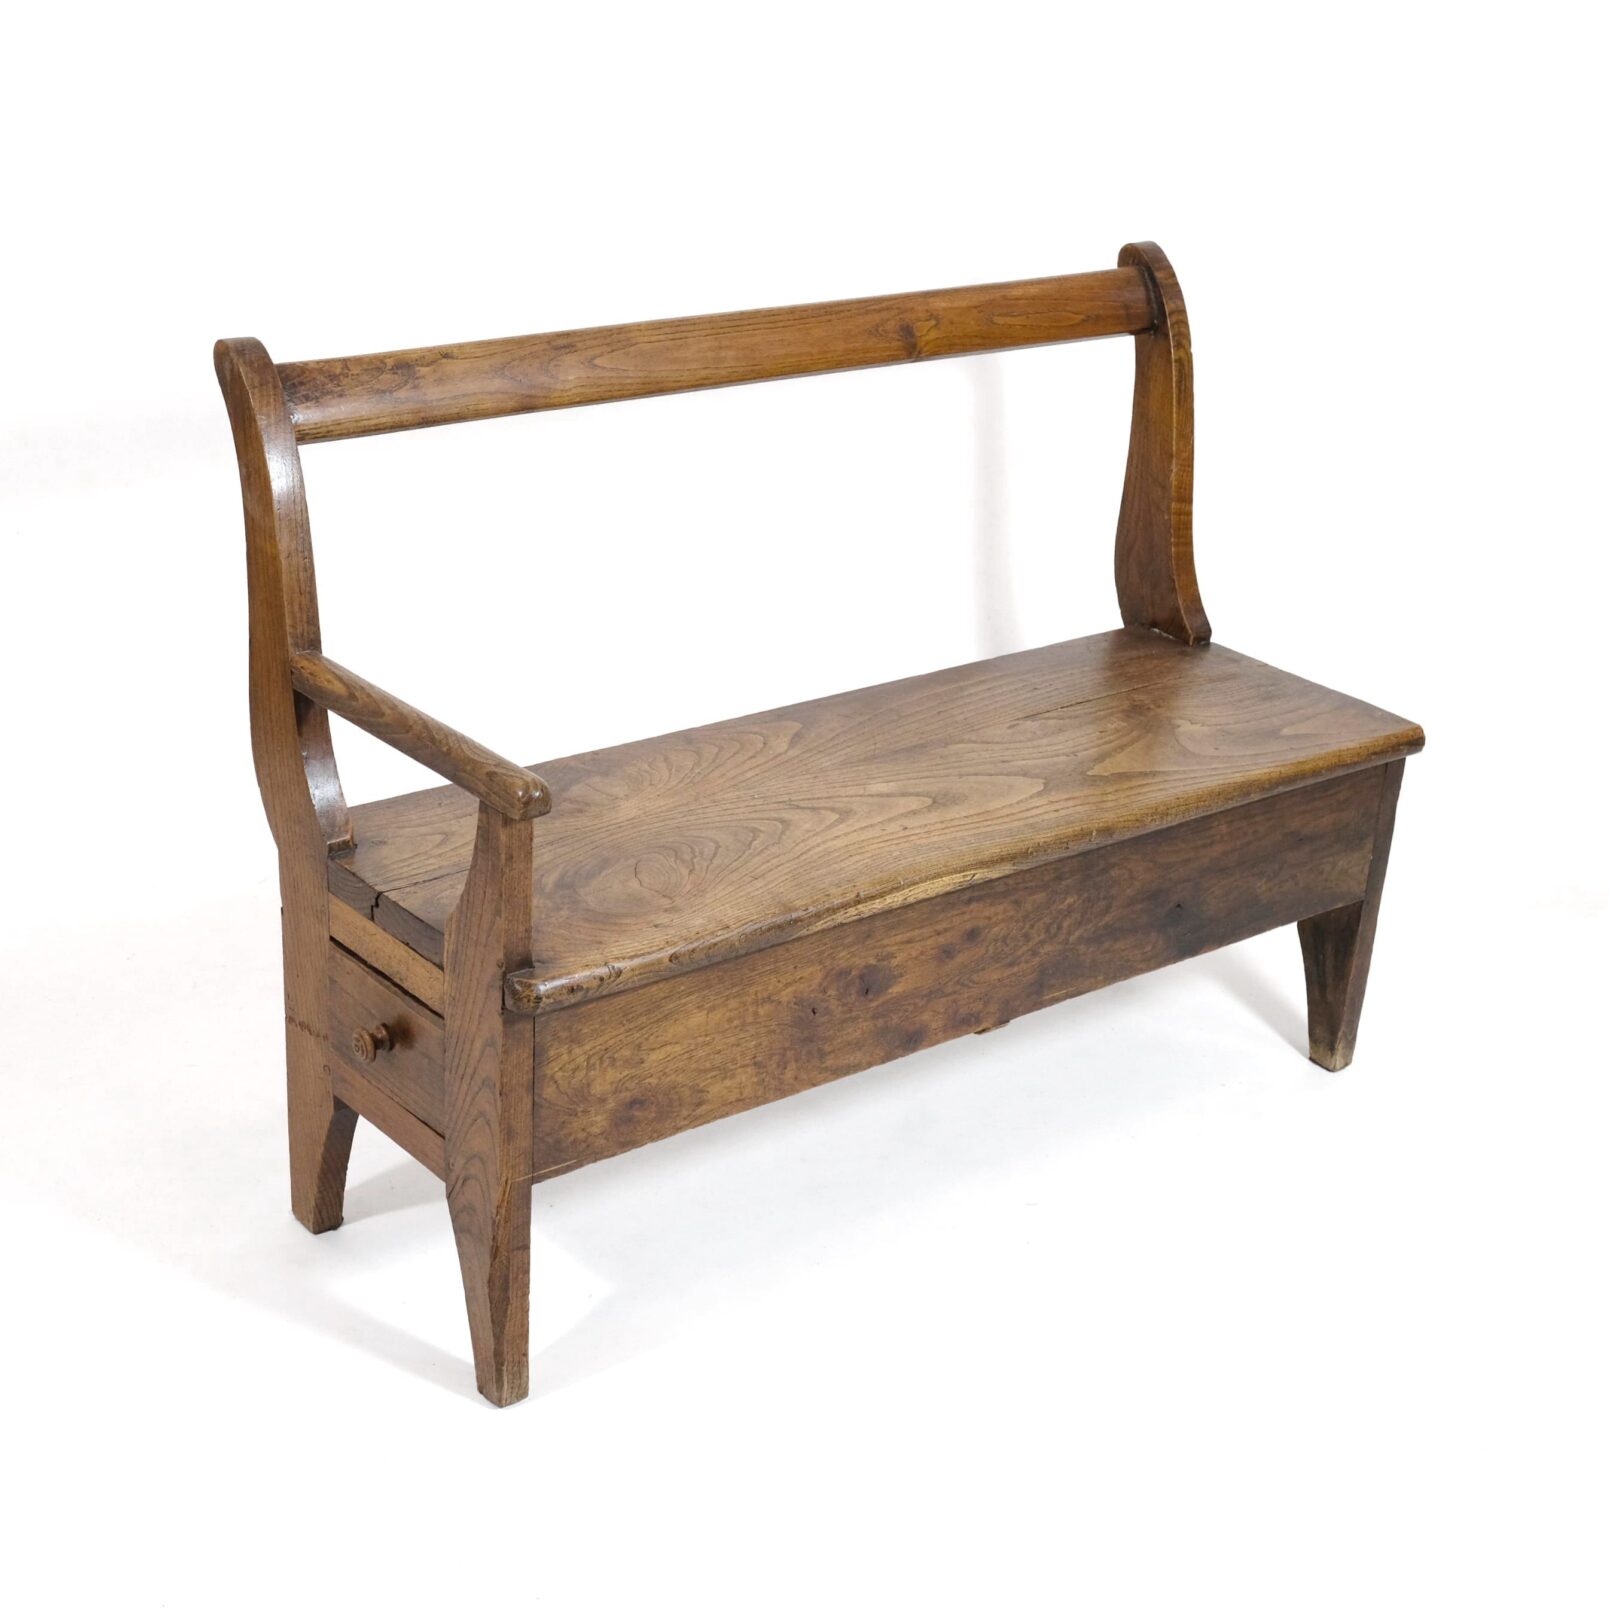 Handcrafted wooden bench with armrest and drawer on the right.